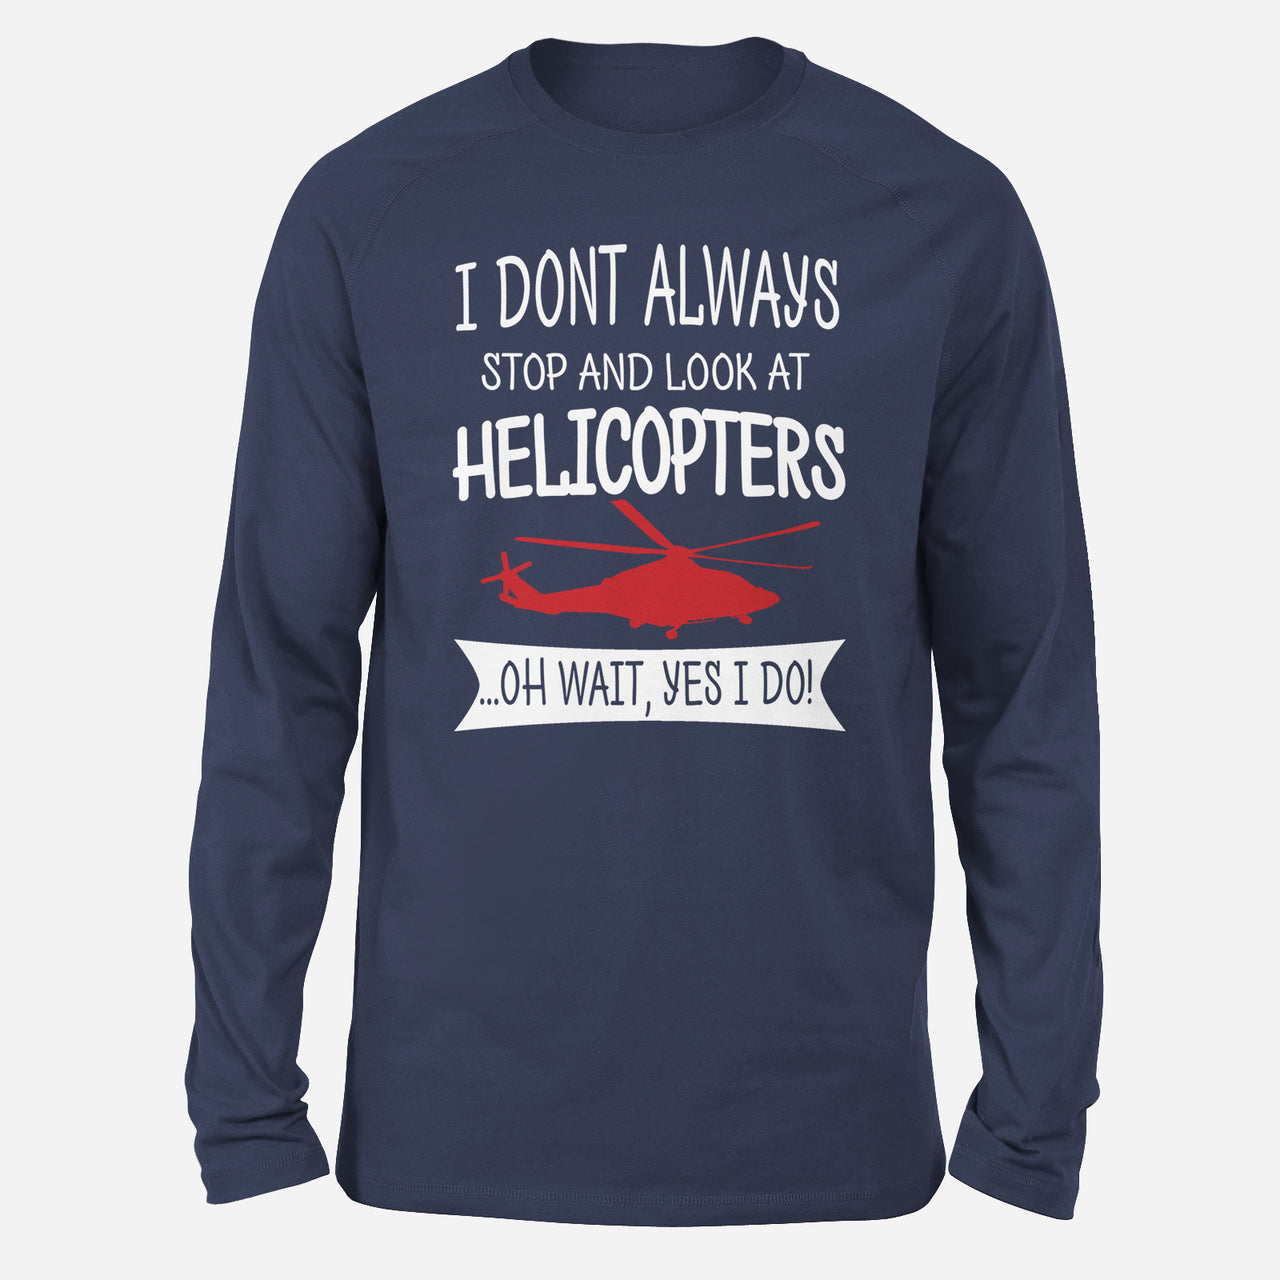 I Don't Always Stop and Look at Helicopters Designed Long-Sleeve T-Shirts